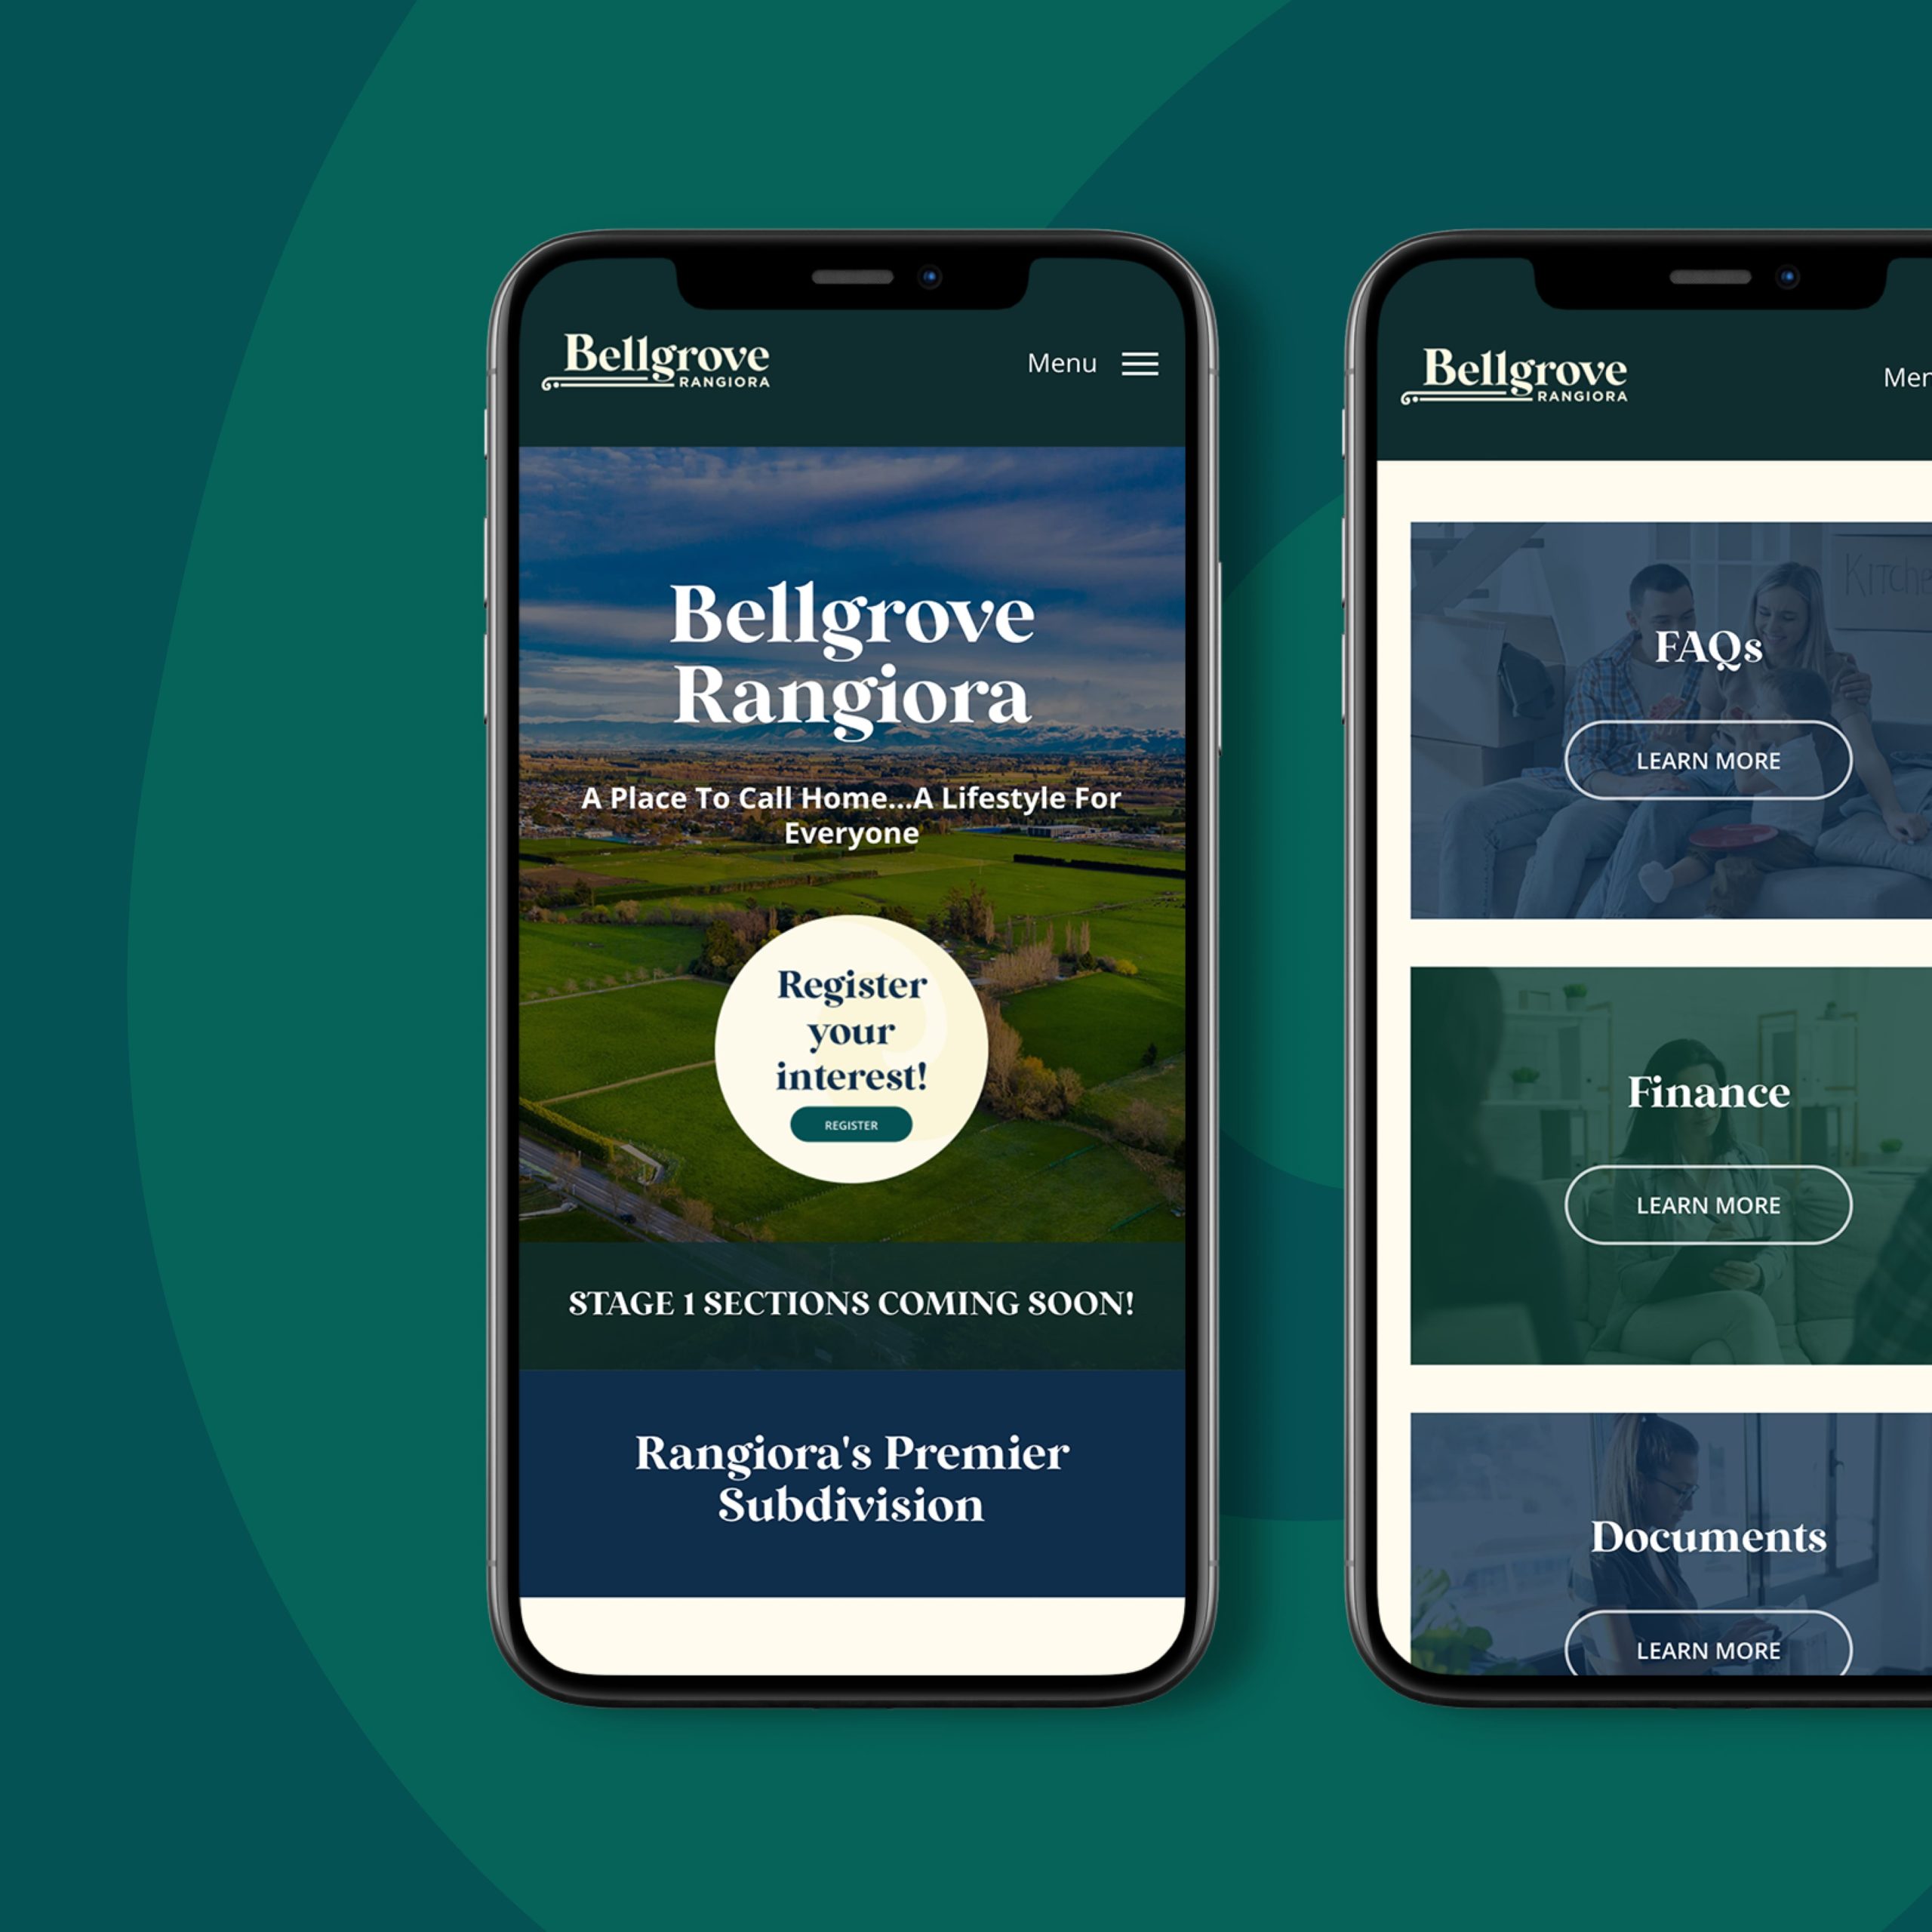 Bellgrove website design and development completed by MoMac creative agency